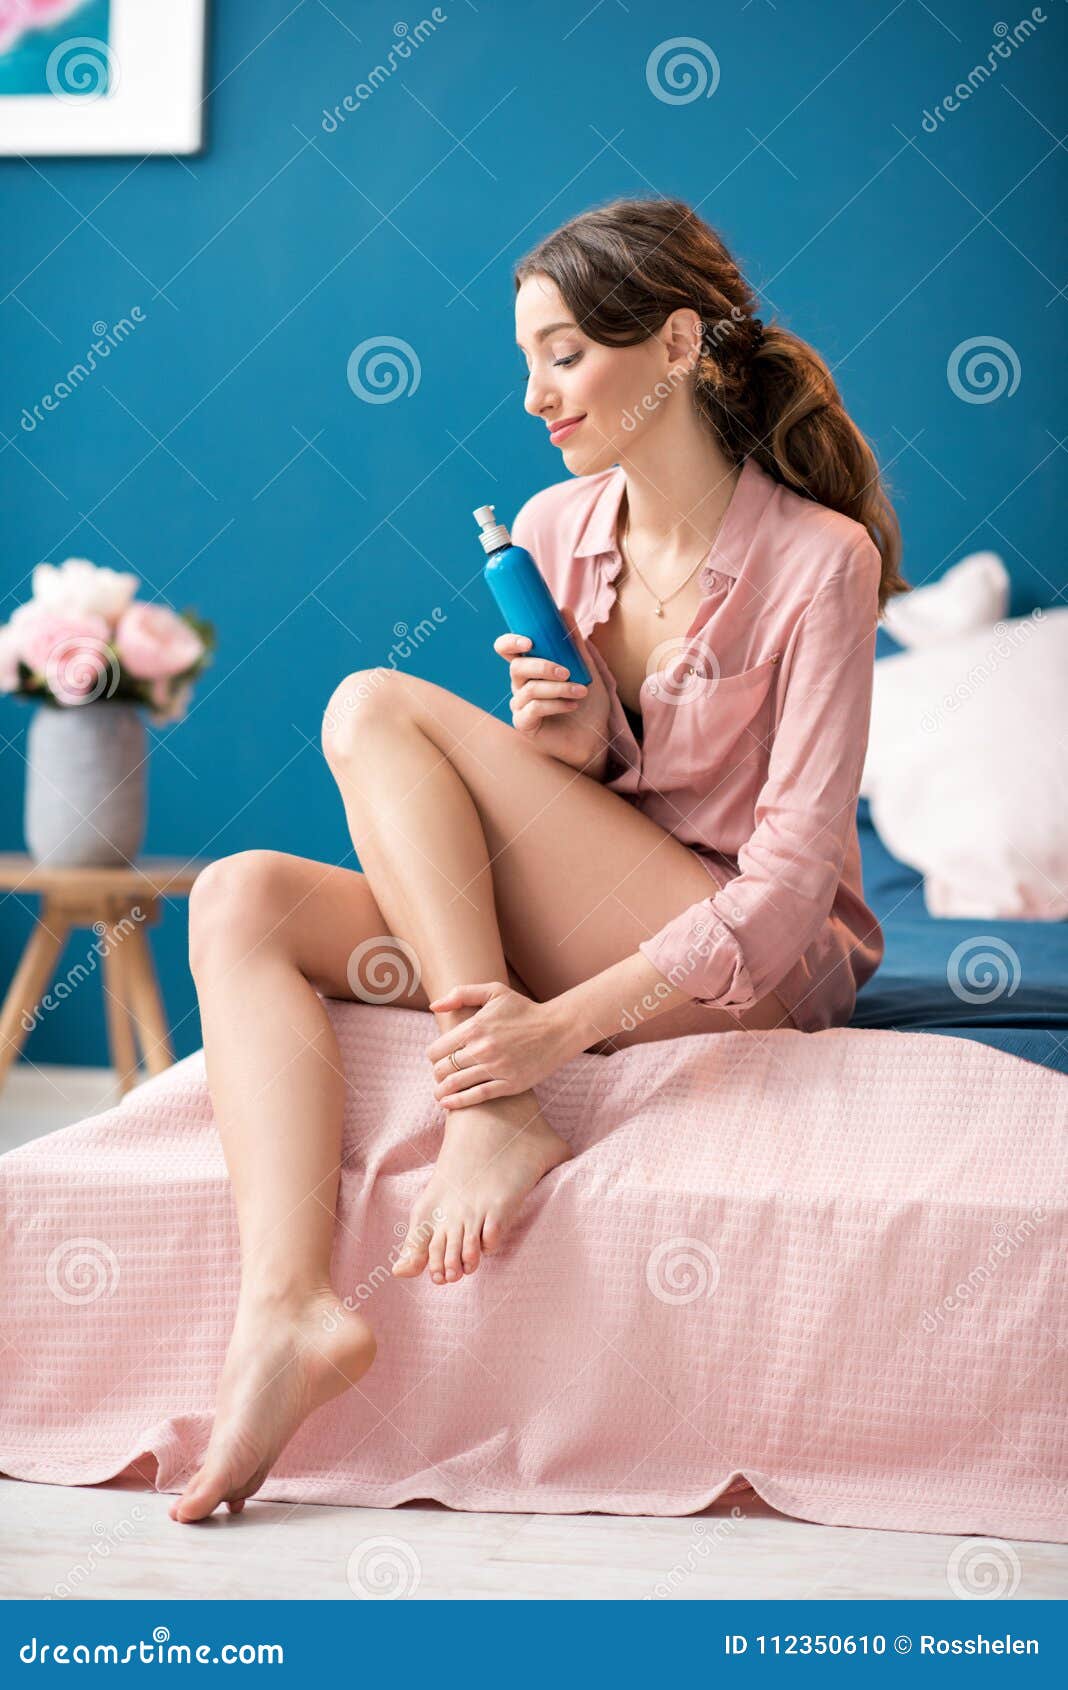 Pretty woman with a bottle between her legs Stock Photo